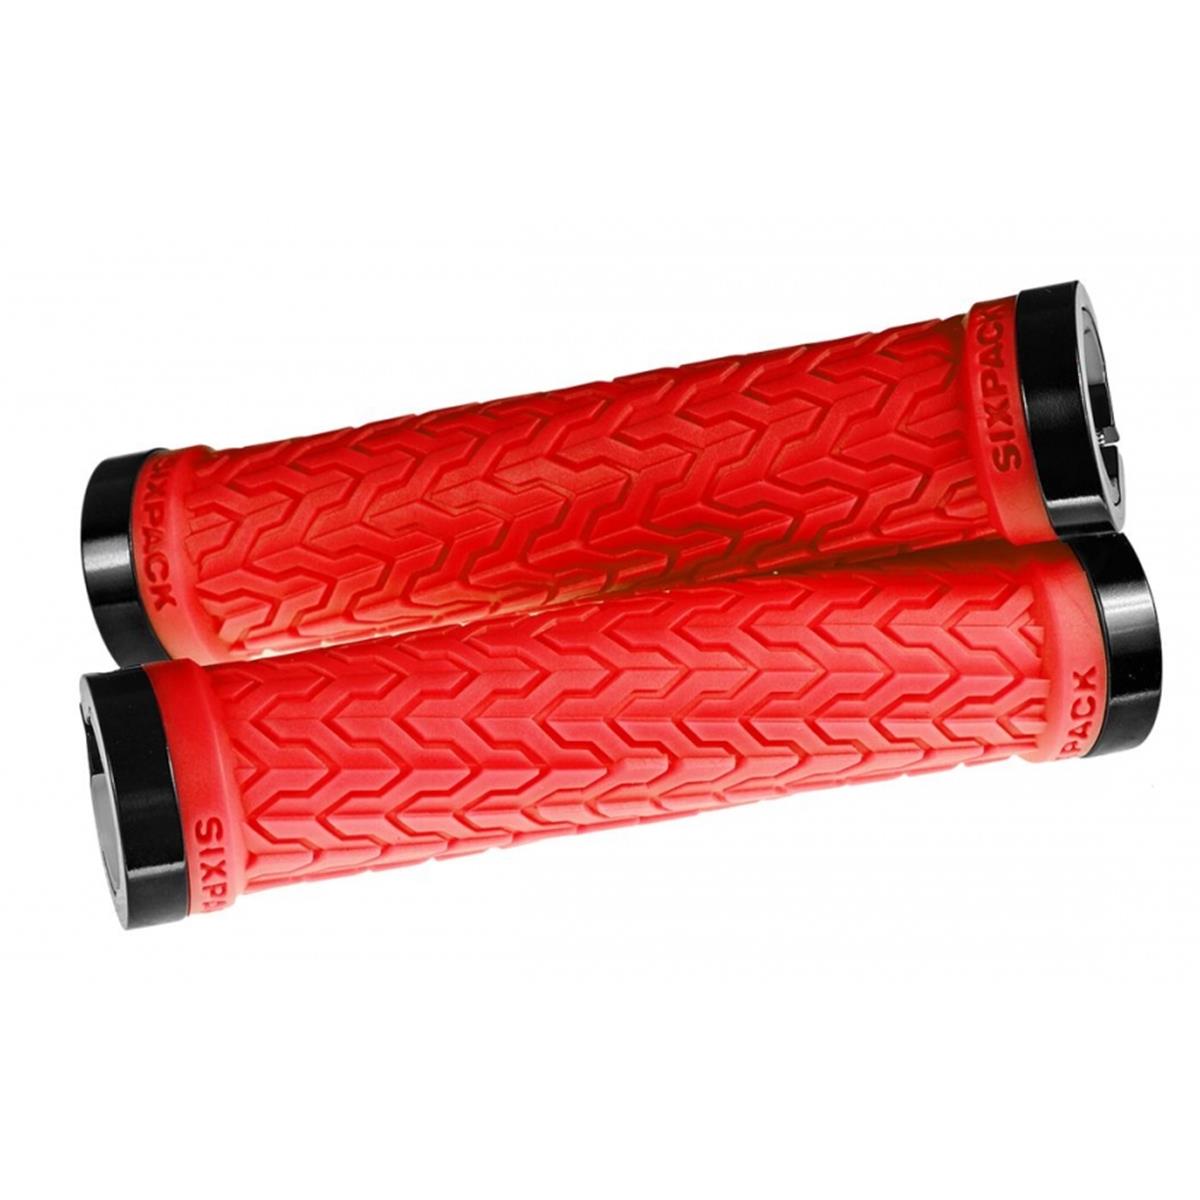 Sixpack MTB Grips S-Trix Red/Black, Lock On System, 125 mm Length